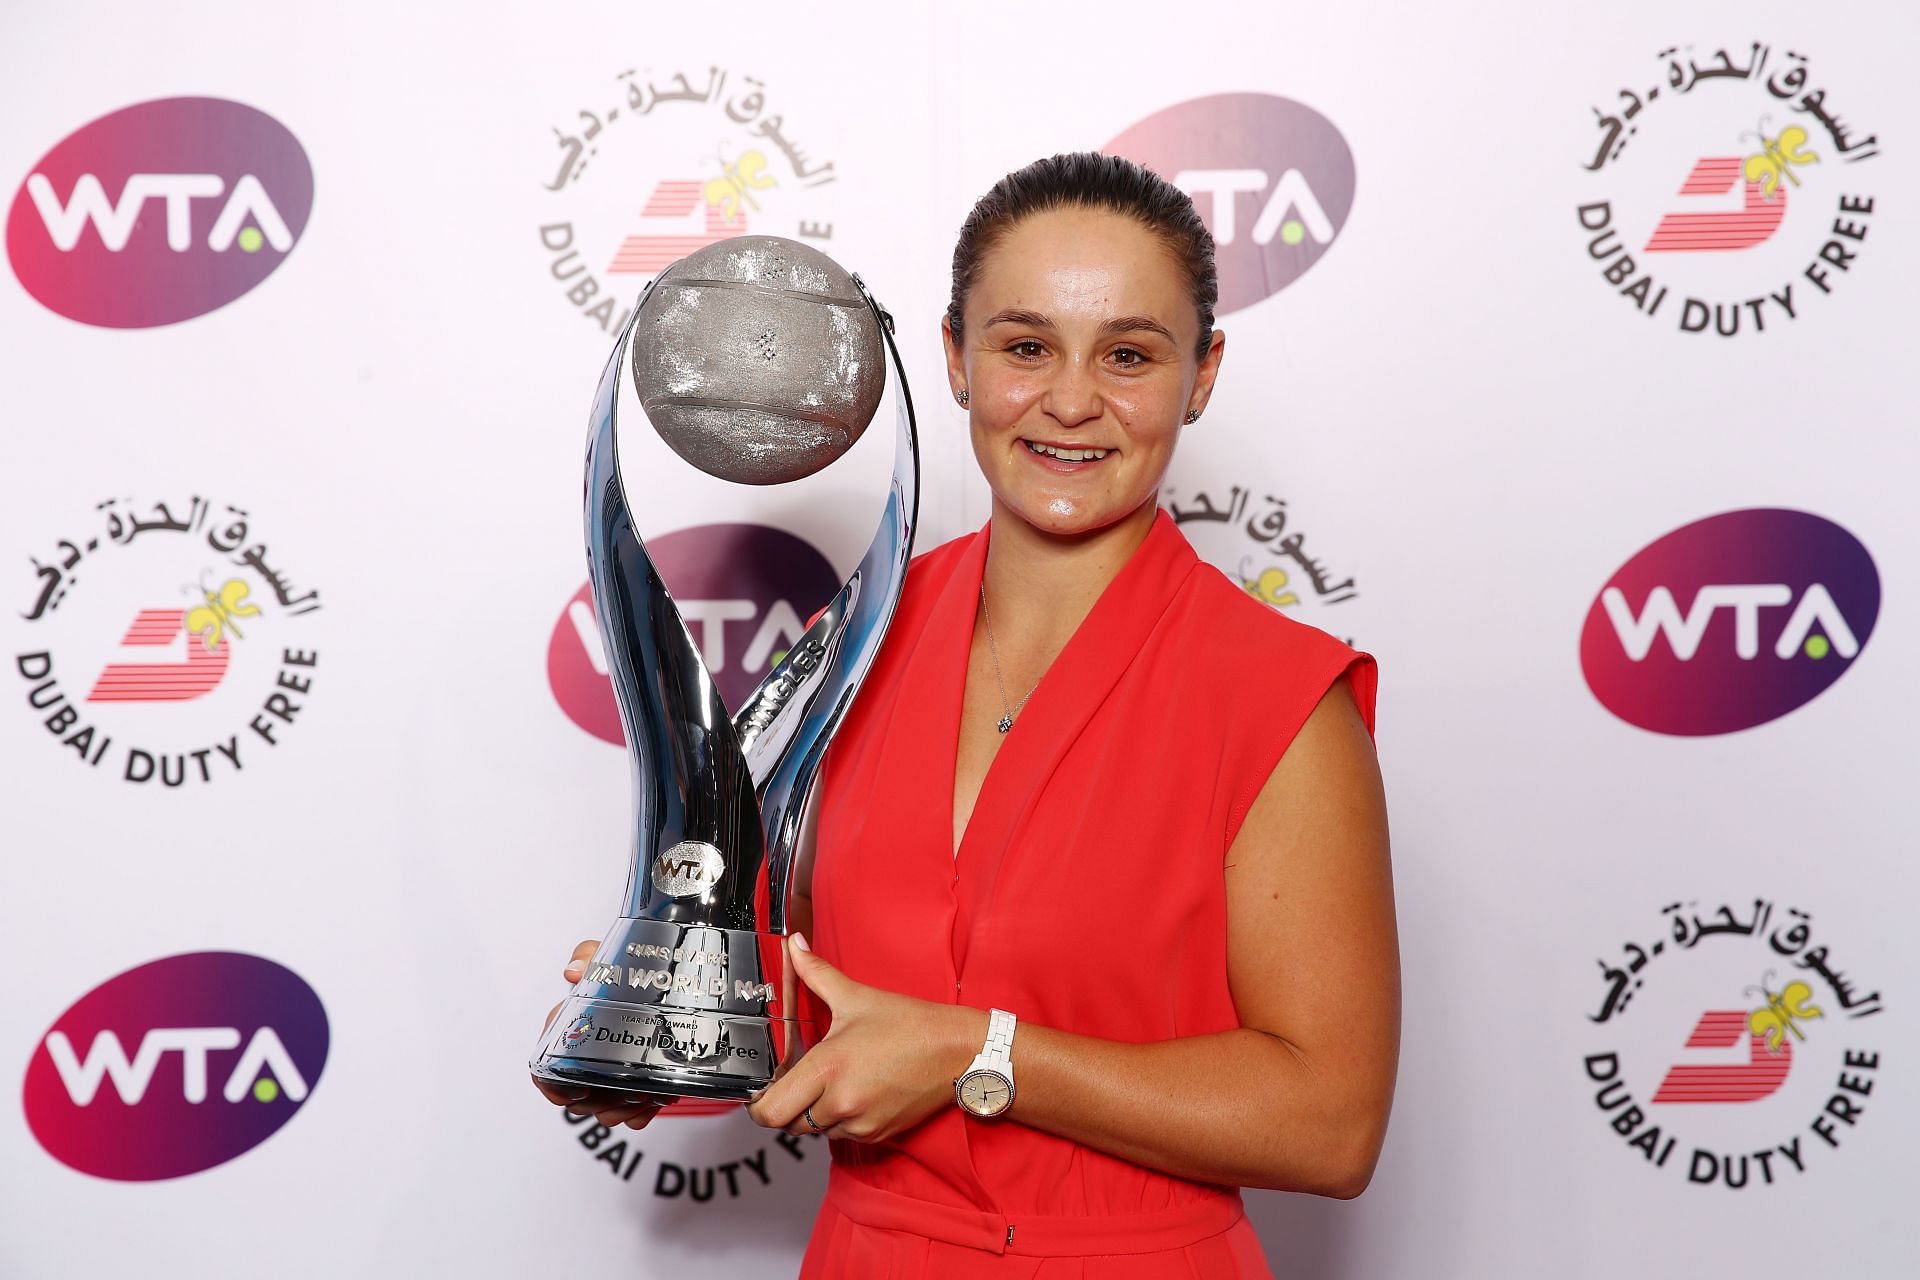 Ashleigh Barty with her Year-End World No. 1 trophy in 2019